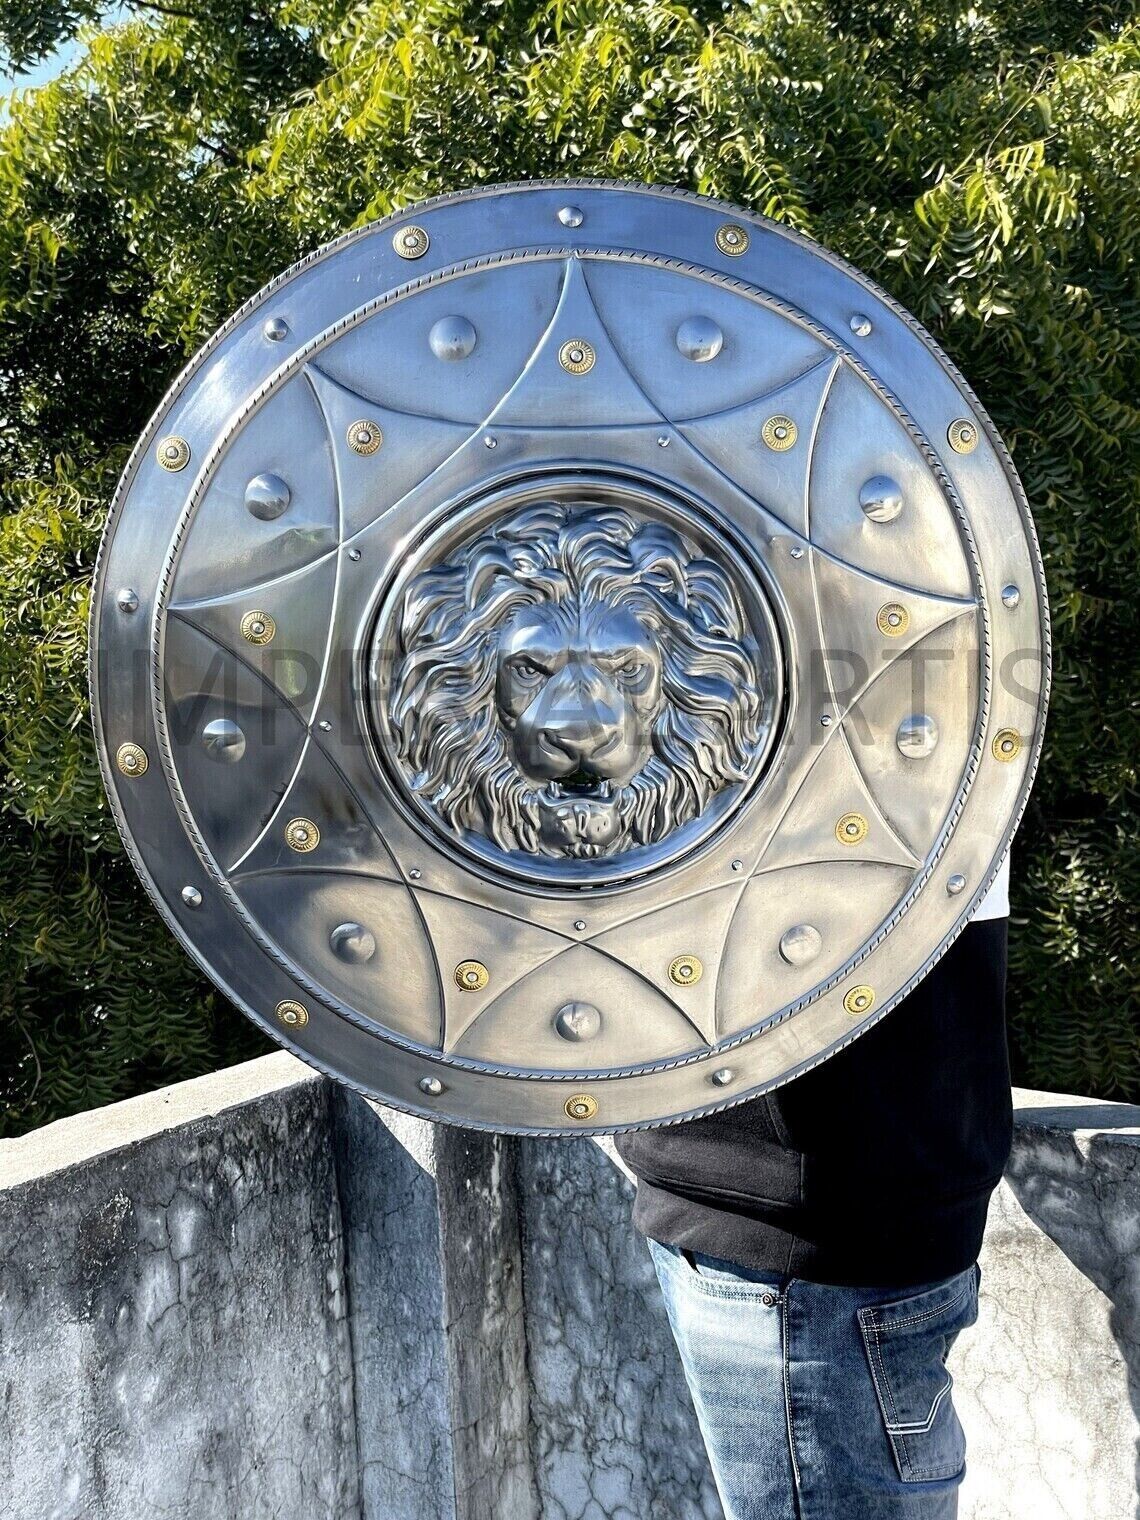 Lion Face Round Medieval Shield Knight Armor Shield Solid Steel Size 24 Inches